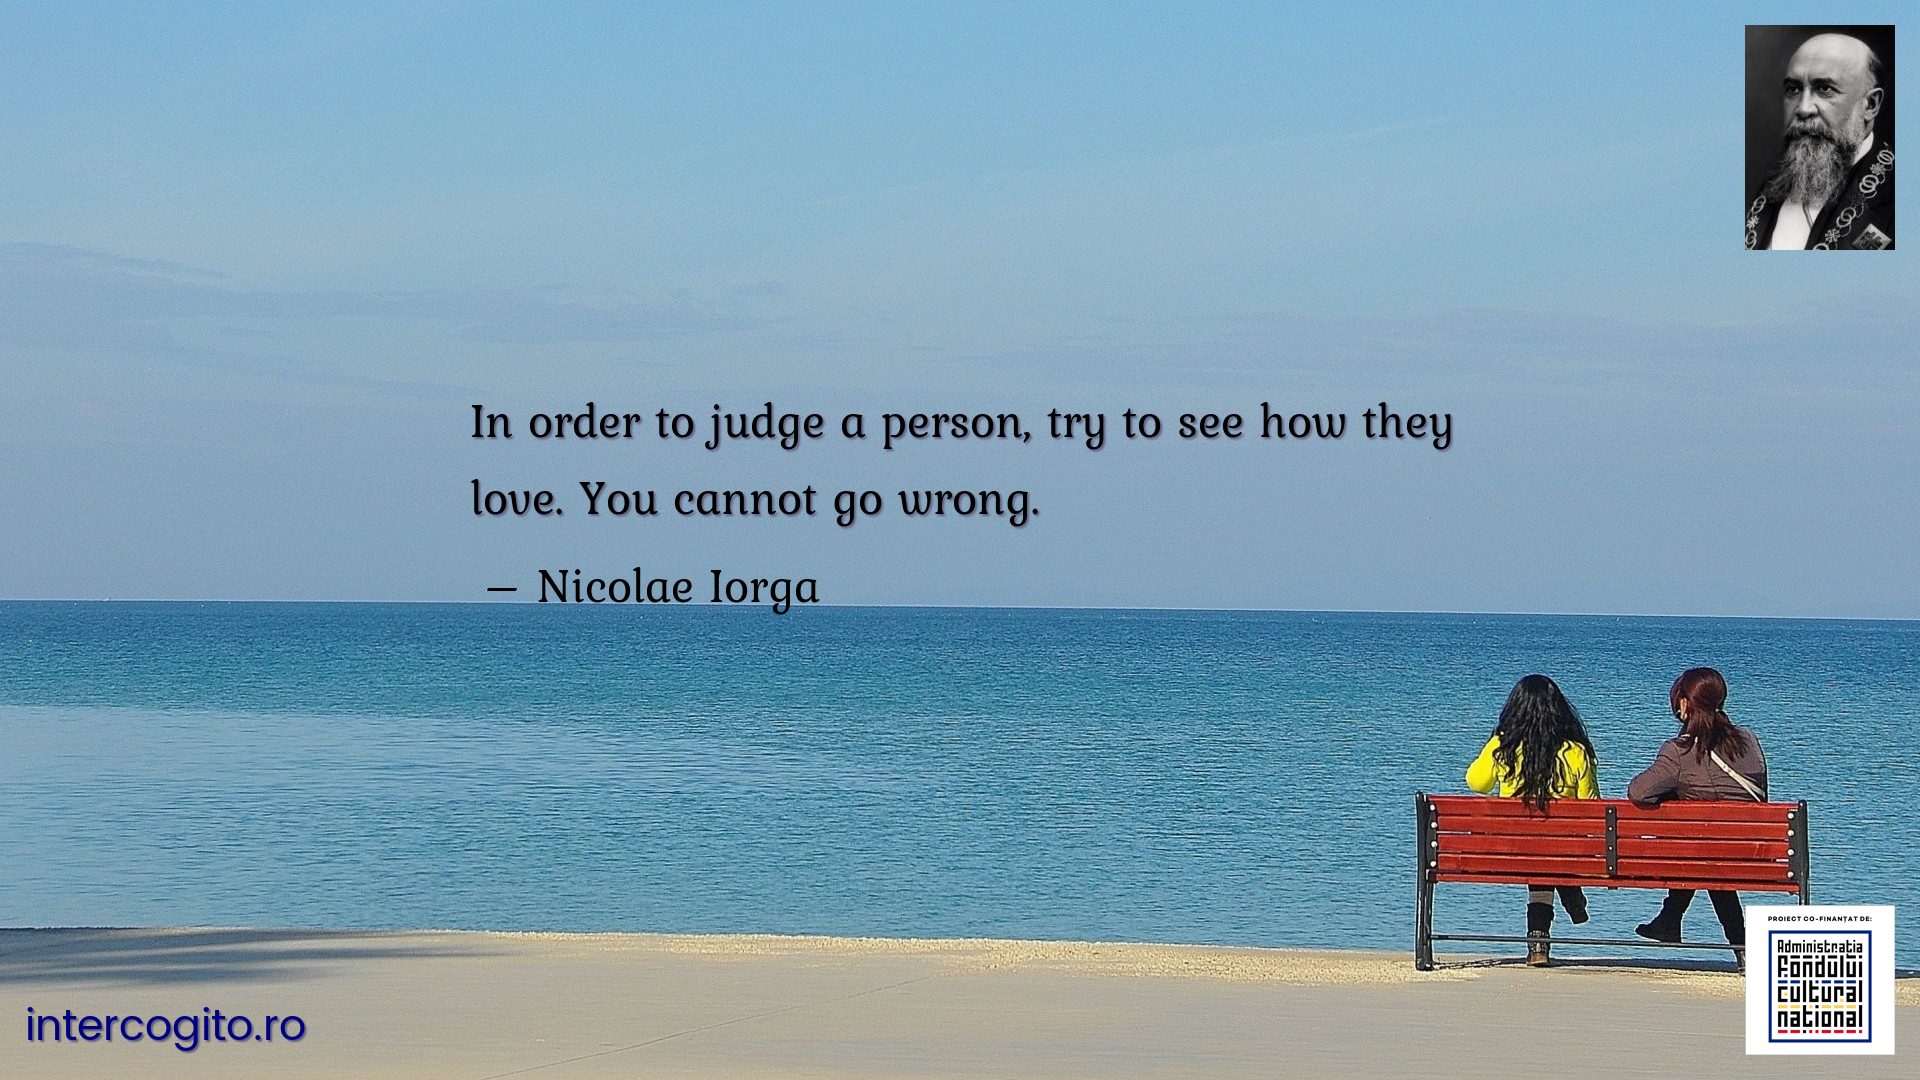 In order to judge a person, try to see how they love. You cannot go wrong.